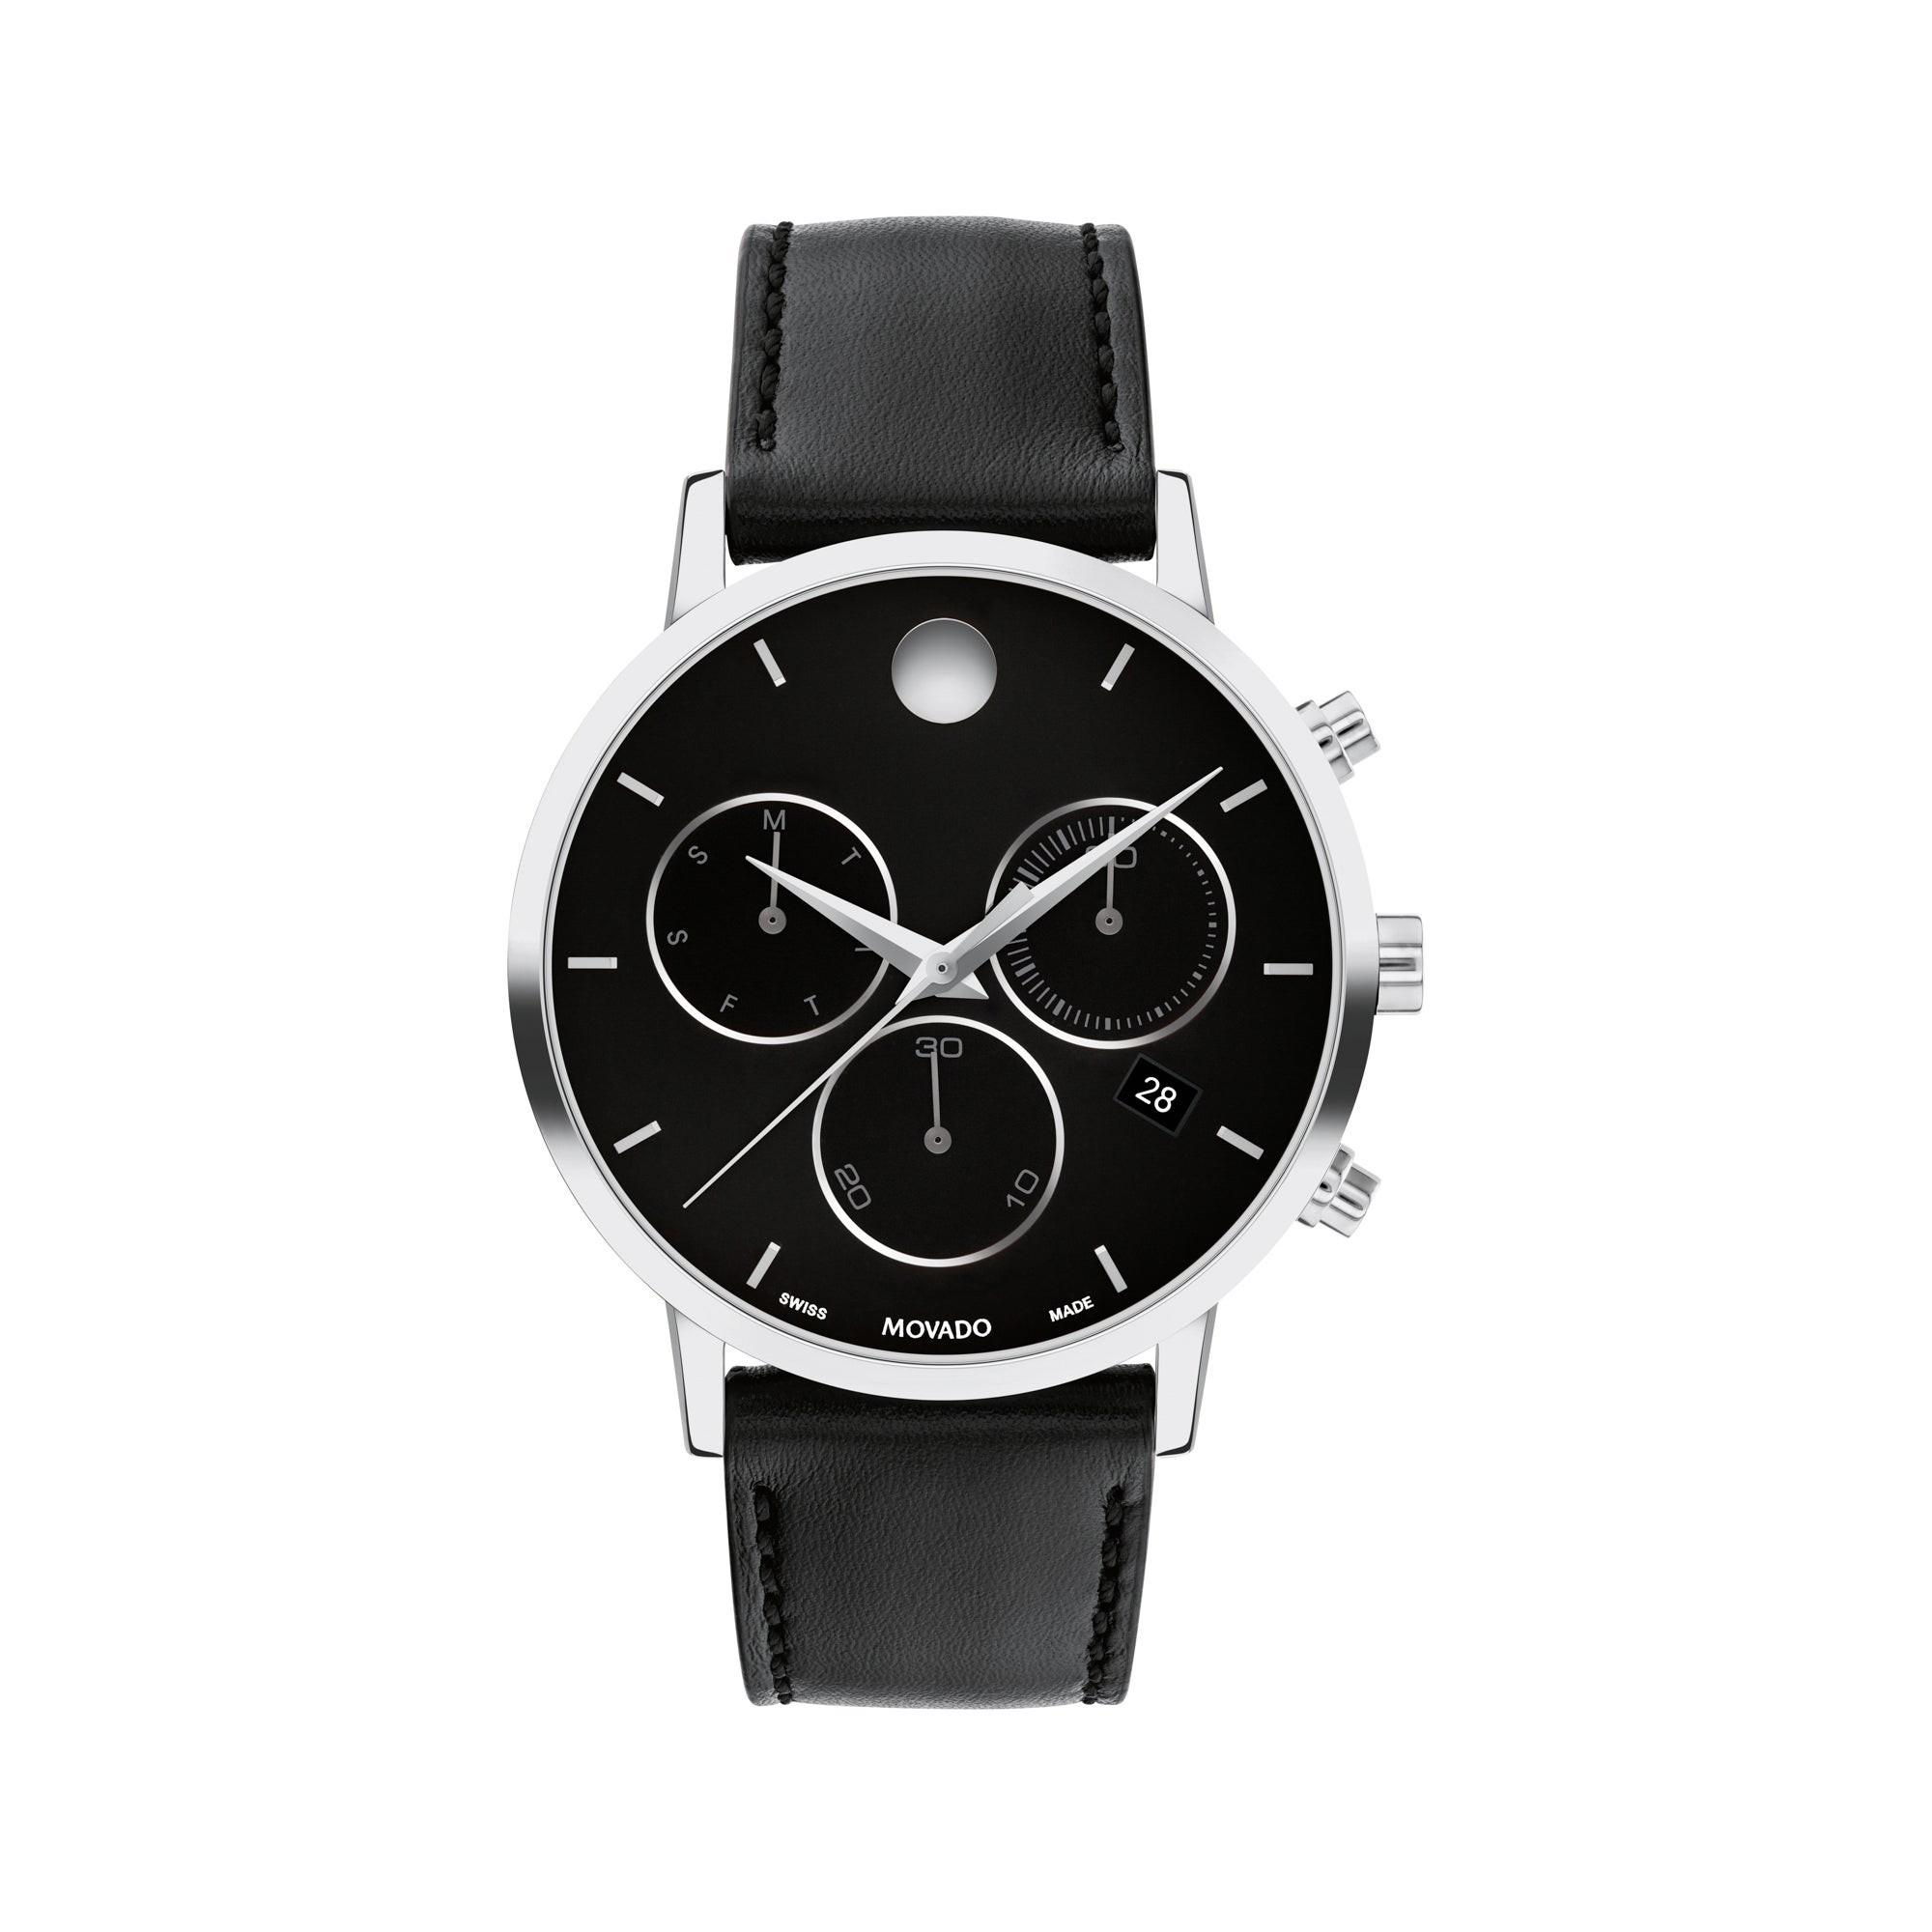 Men's Museum Classic Chronograph Silver & Black Leather Strap Watch, Black Dial